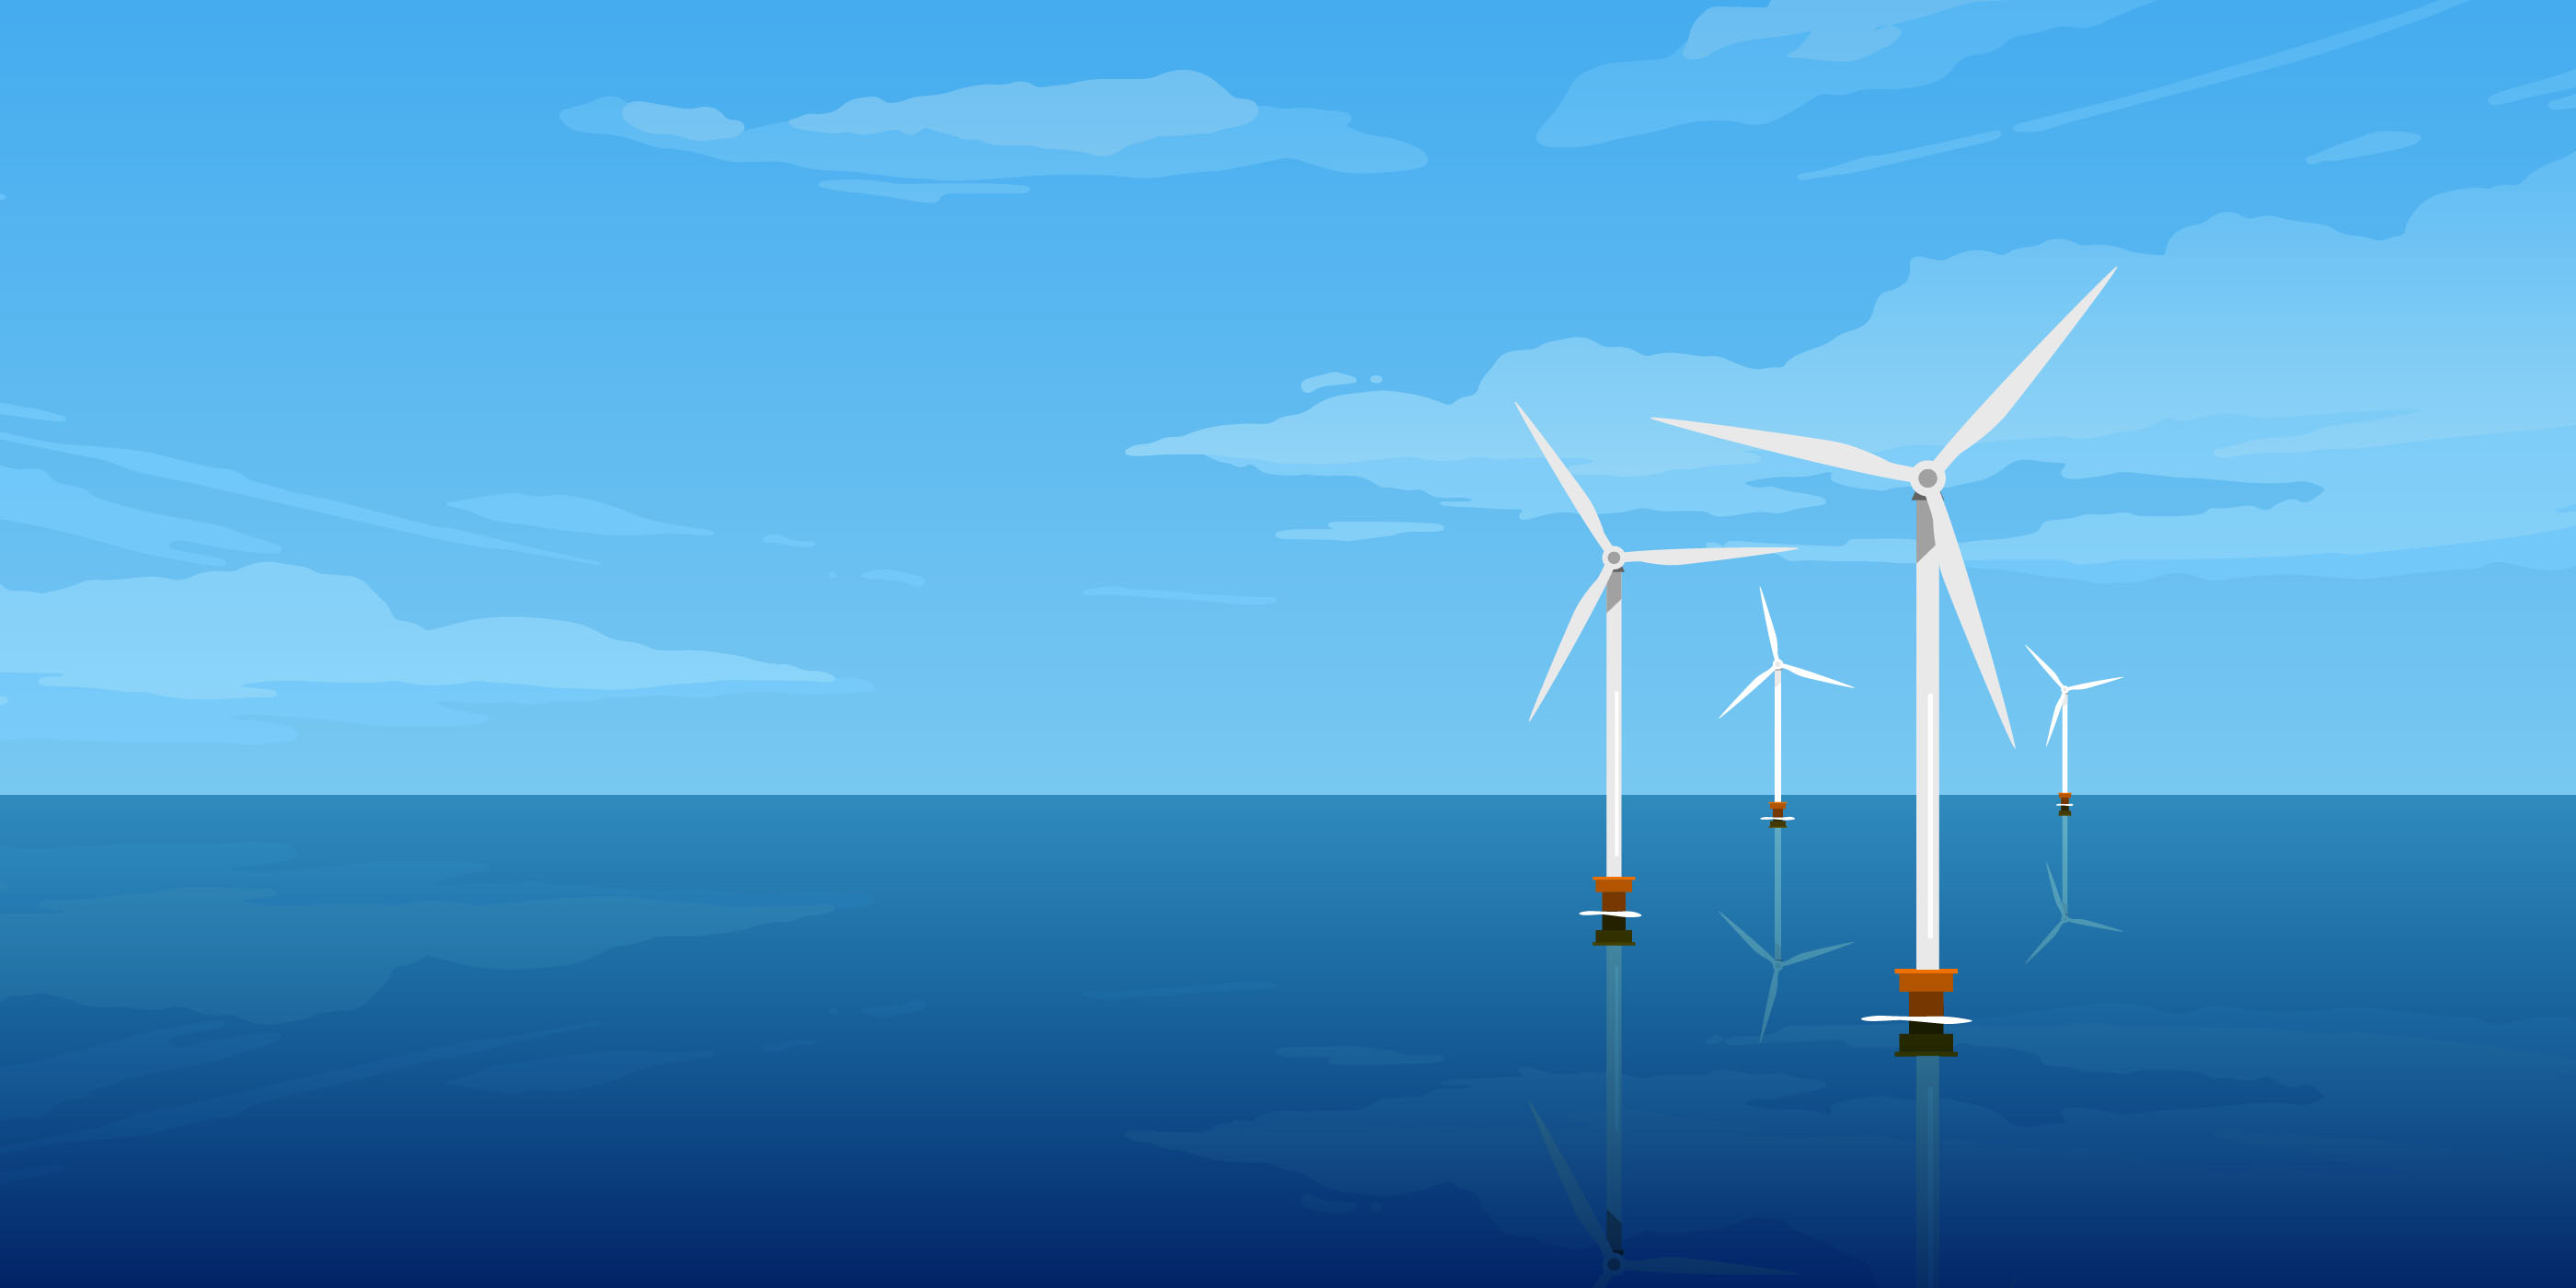 Powering our communities with offshore wind energy